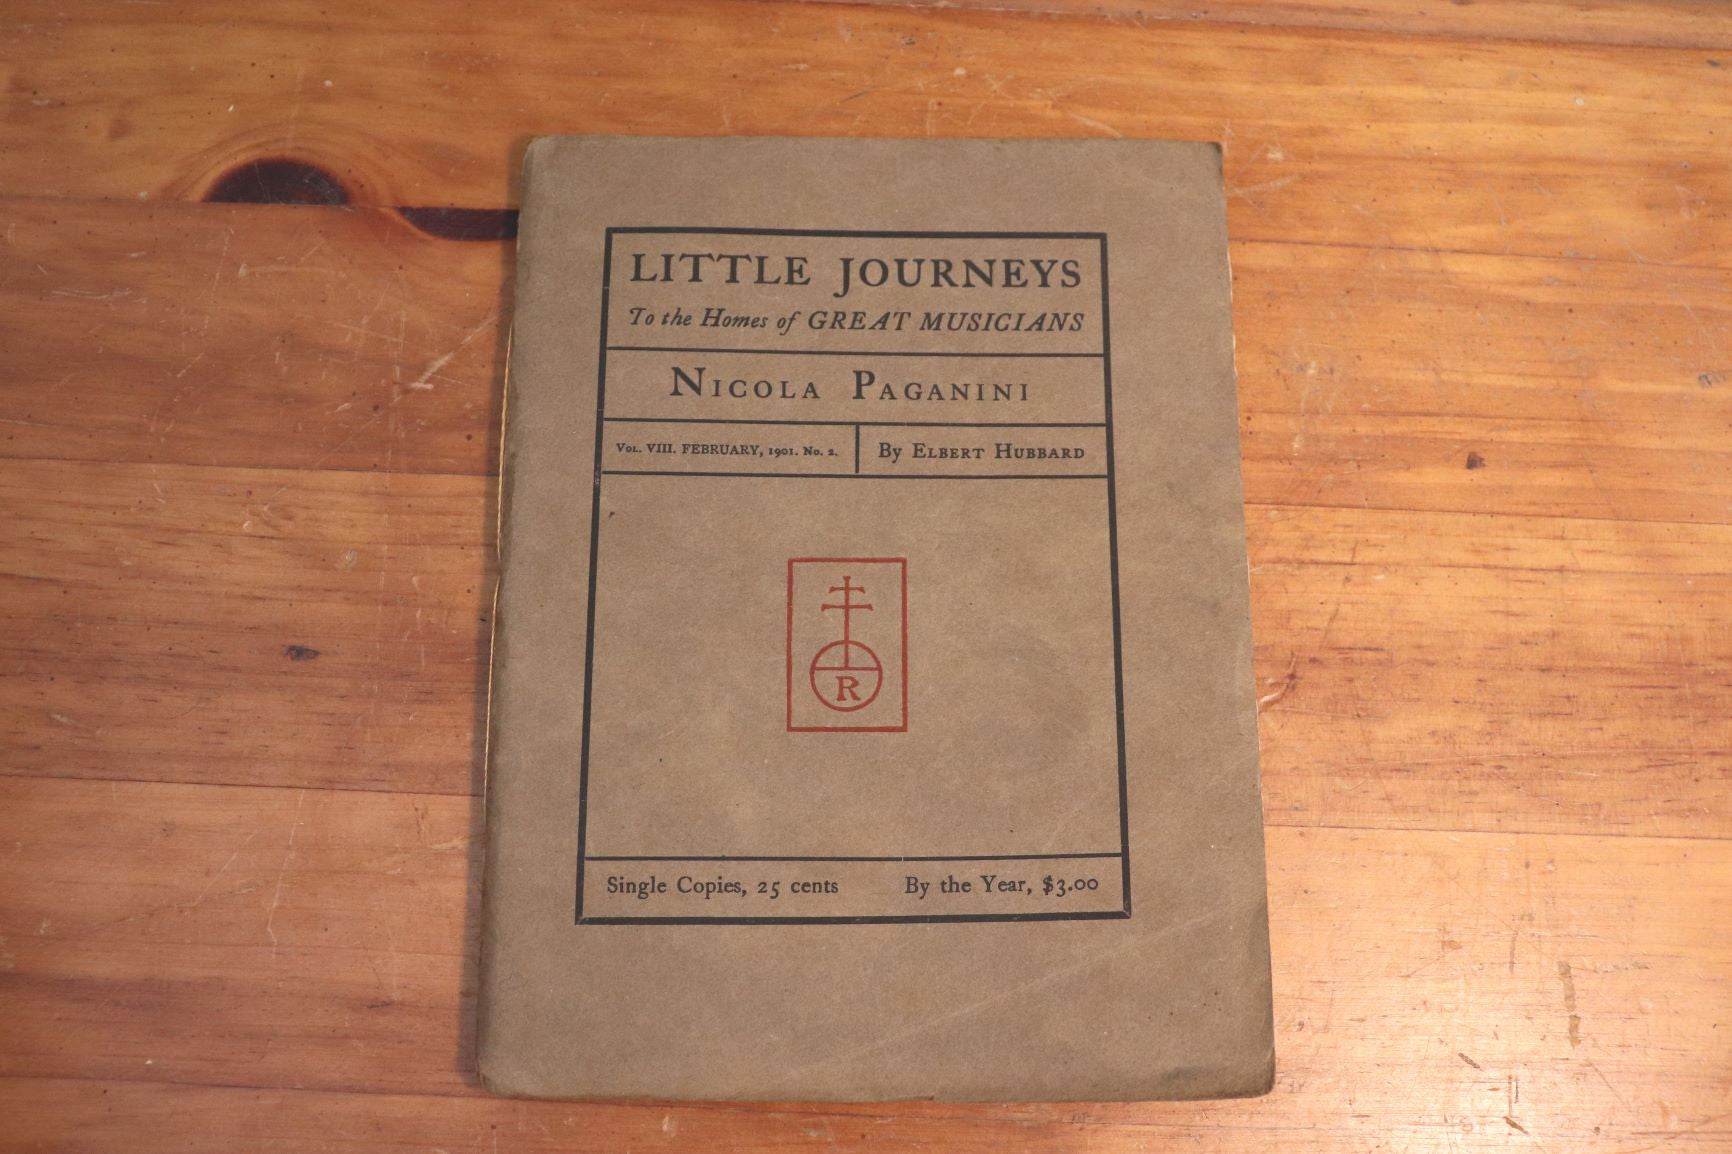 Little Journeys To The Homes of Great Musicians - Nicola Paganini